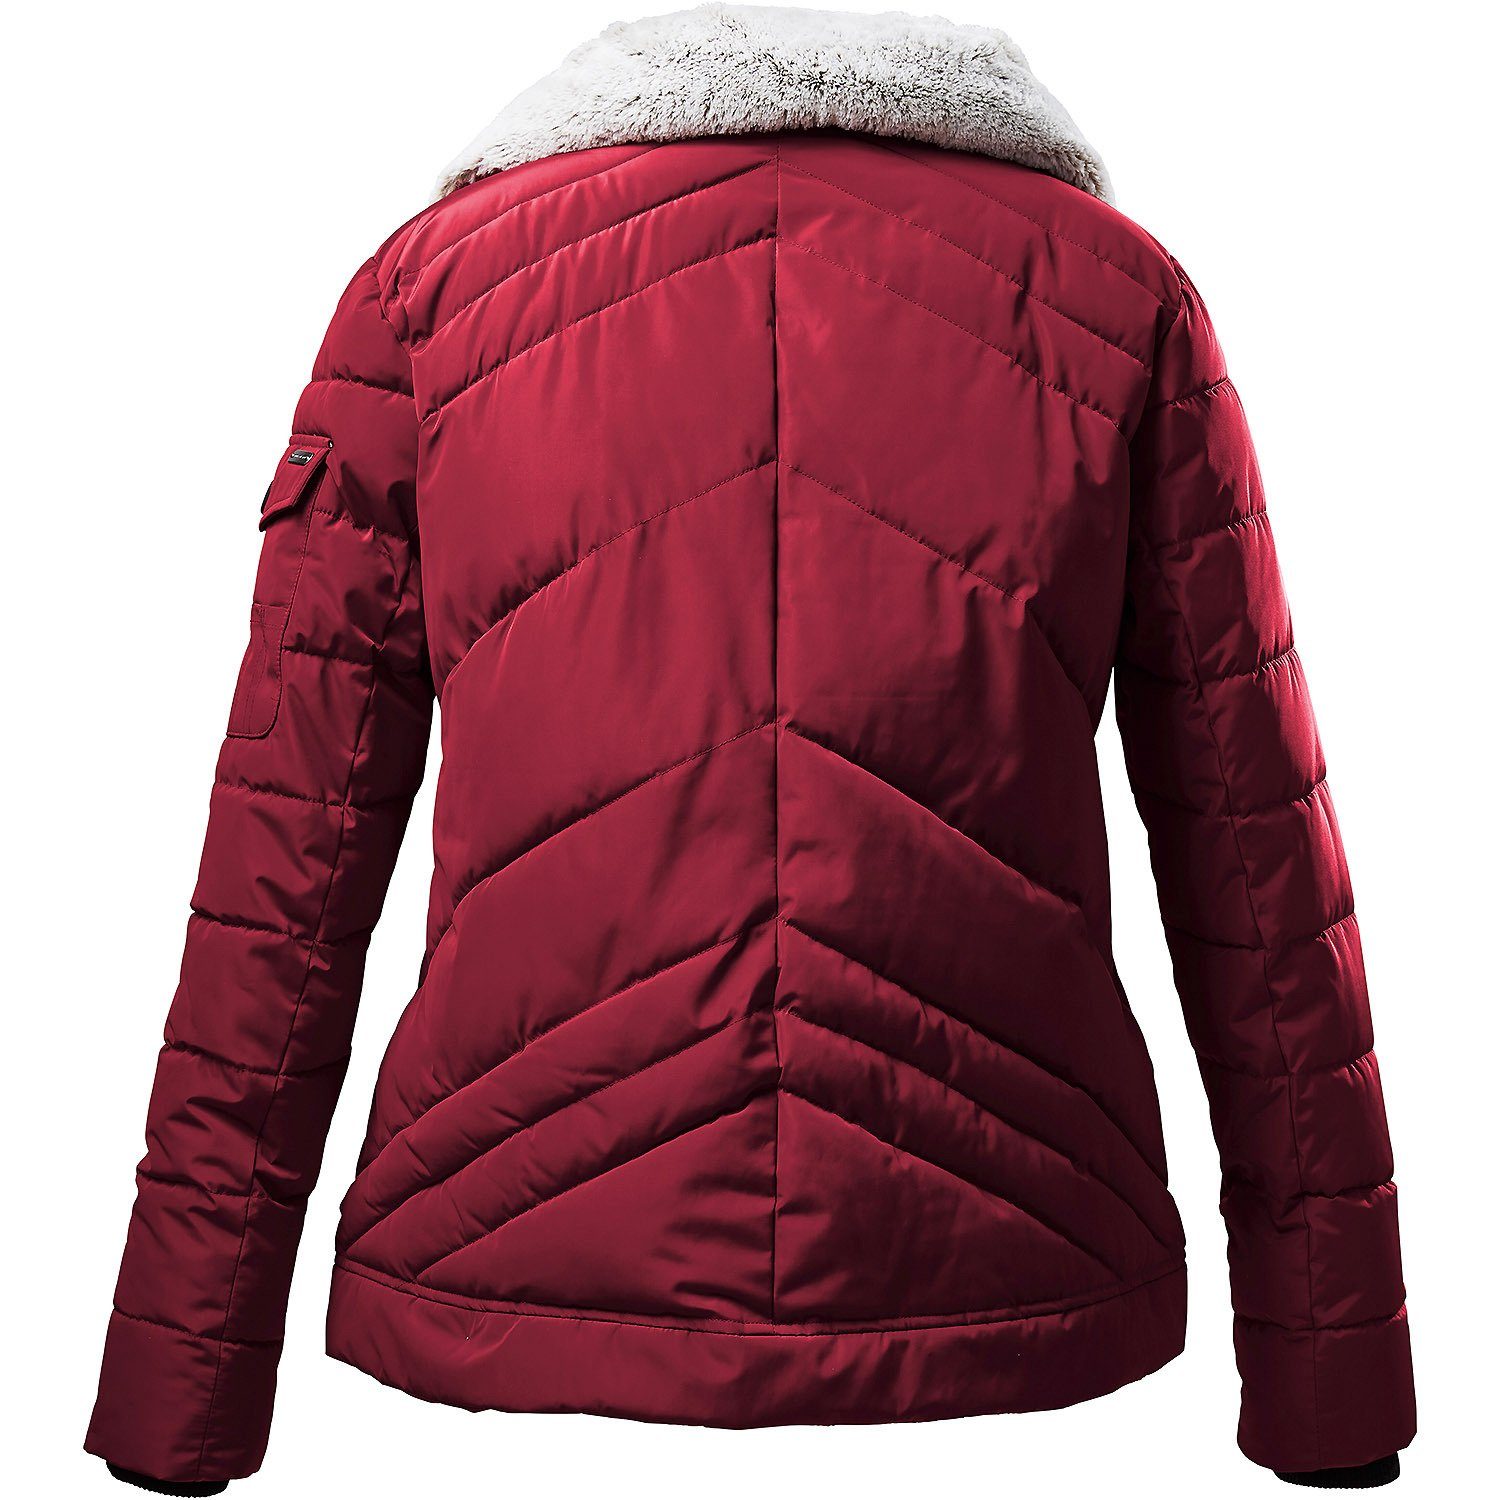 Quilted Dunkelrot STOY Killtec Outdoorjacke A Jacke